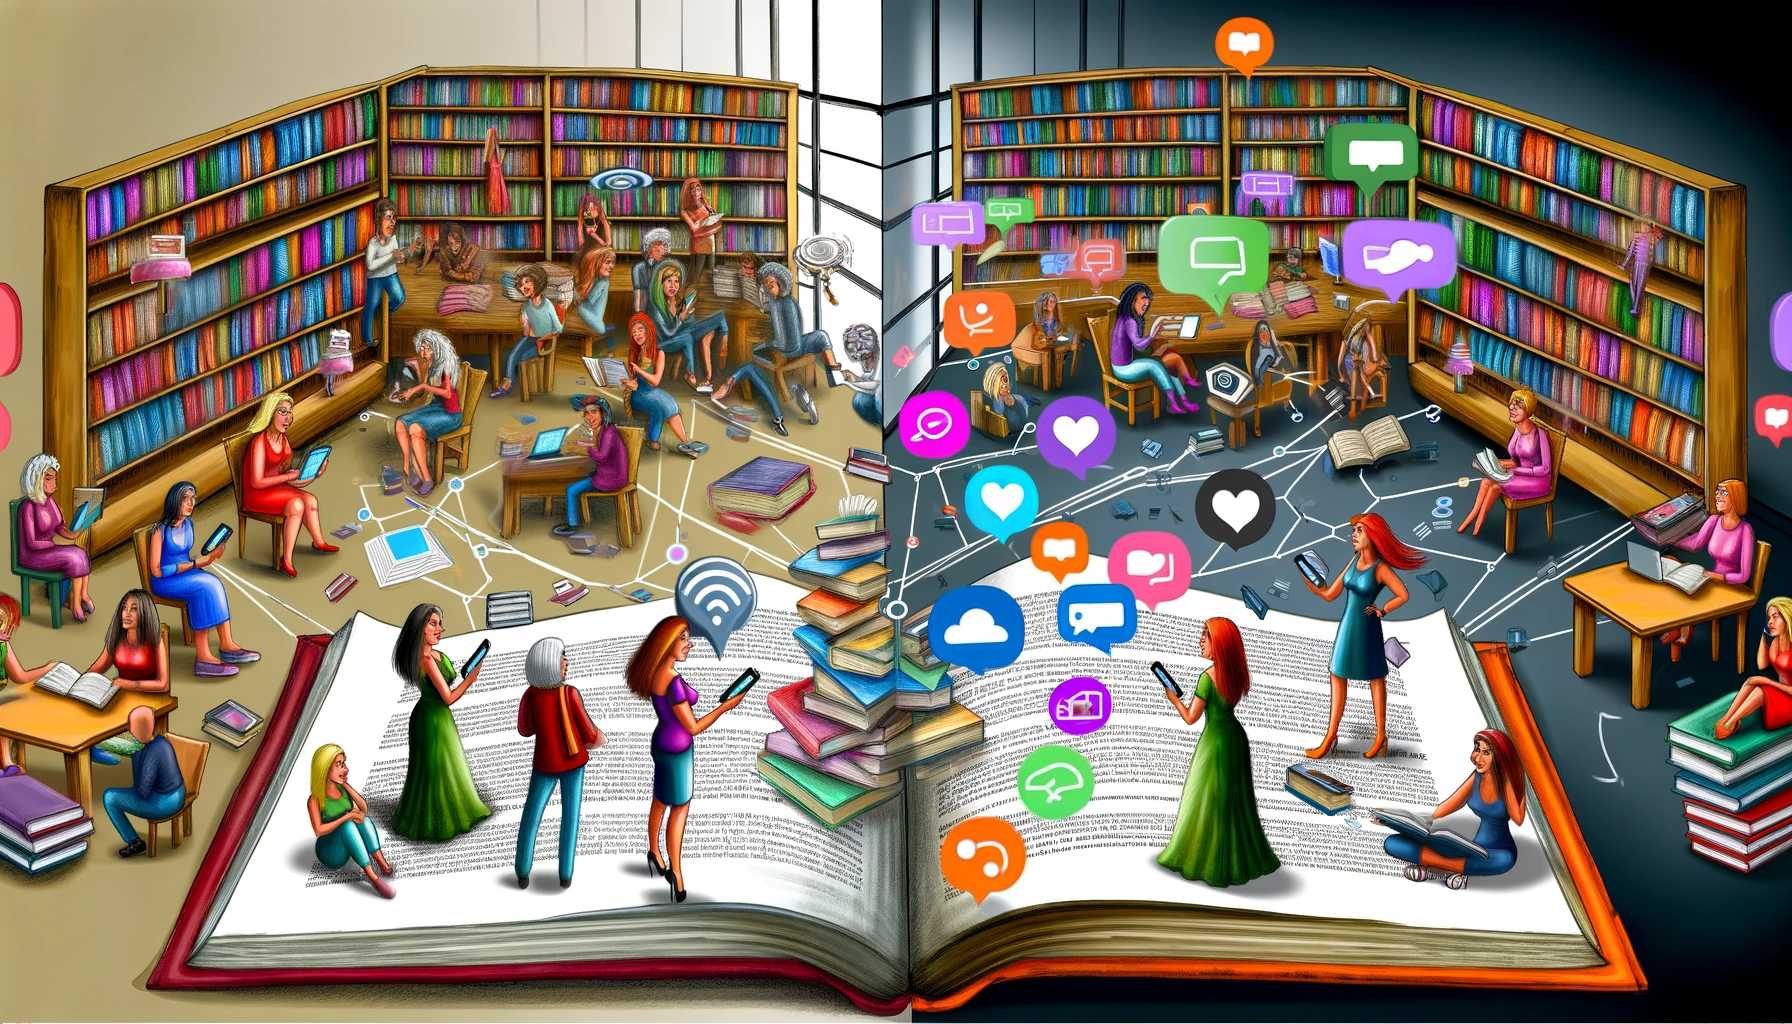 THE RISE OF BOOK INFLUENCERS